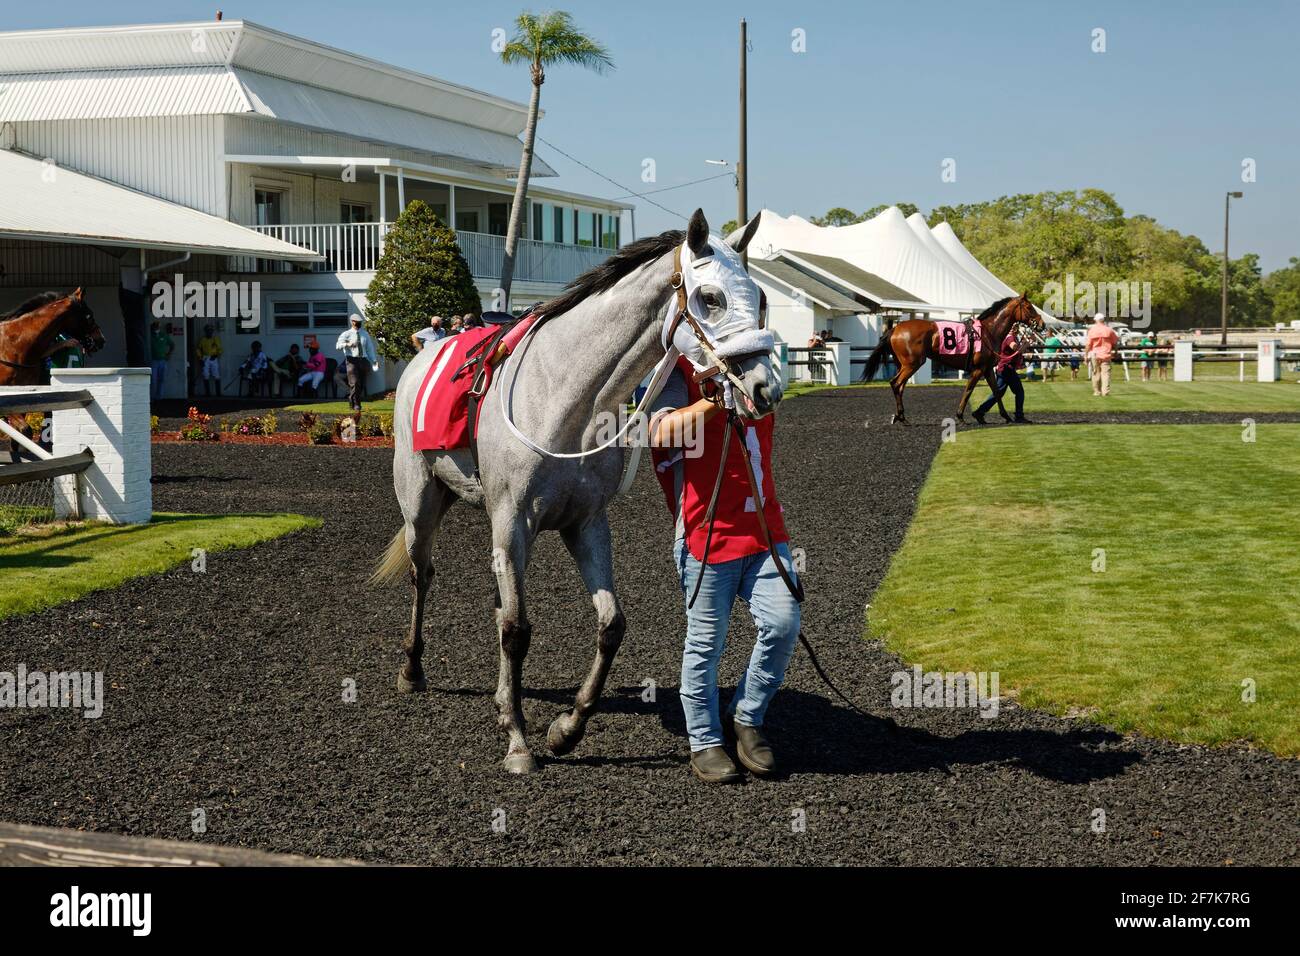 racetrack scene, paddock area, horses walking, animals, thoroughbreds, people, sport, competition, Tampa Bay Downs, Florida, Tampa, FL, spring Stock Photo